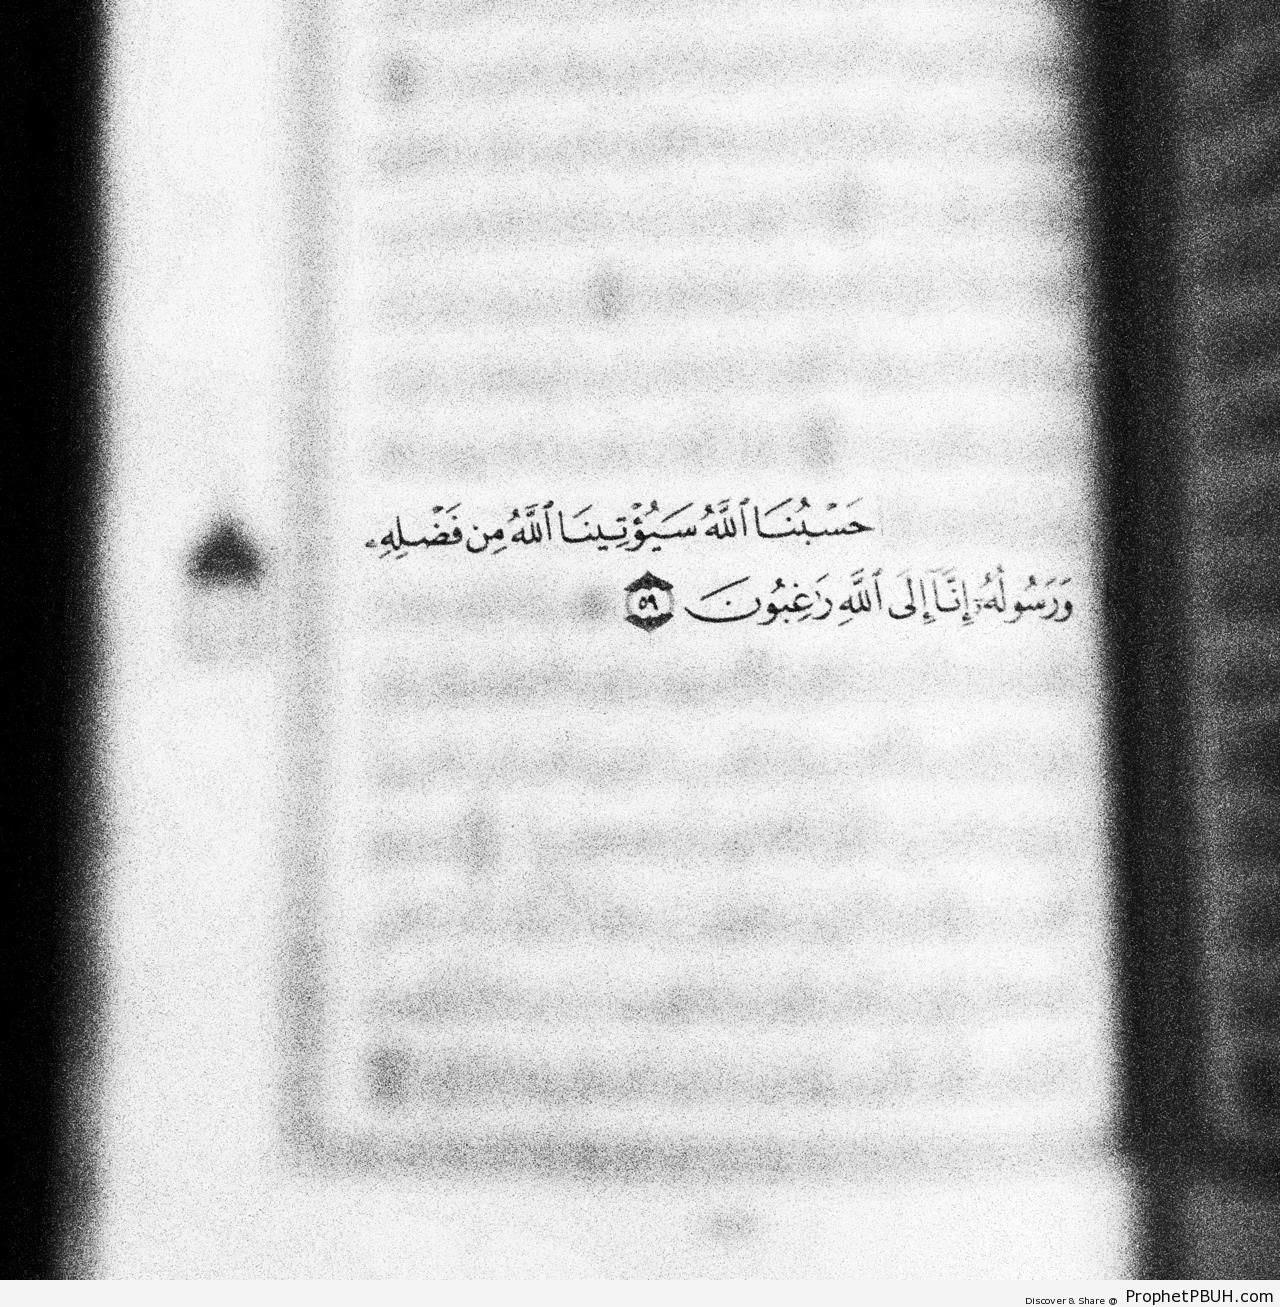 Allah suffices for us, and Allah will give us& - Mushaf Photos (Books of Quran) 